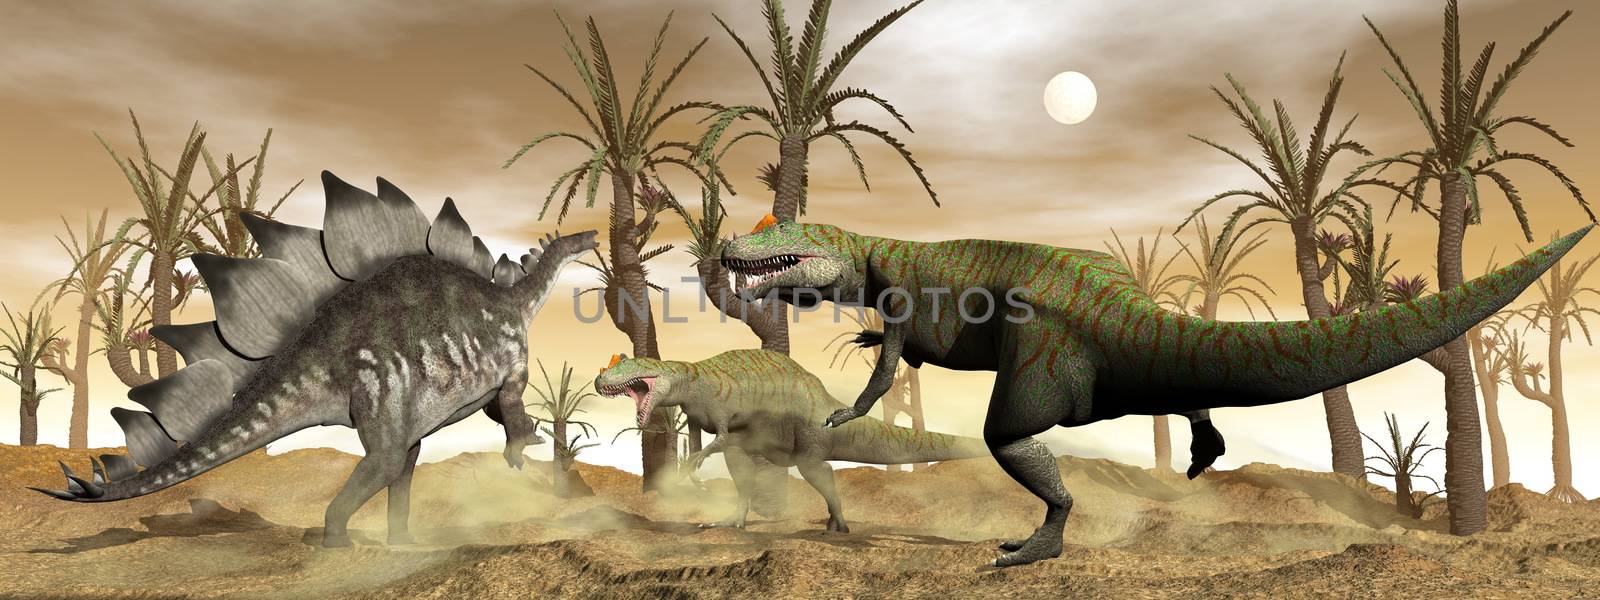 Two allosaurus and one stegosaurus dinosaurs fighting next to williamson trees in the desert by brown sunset - 3D render